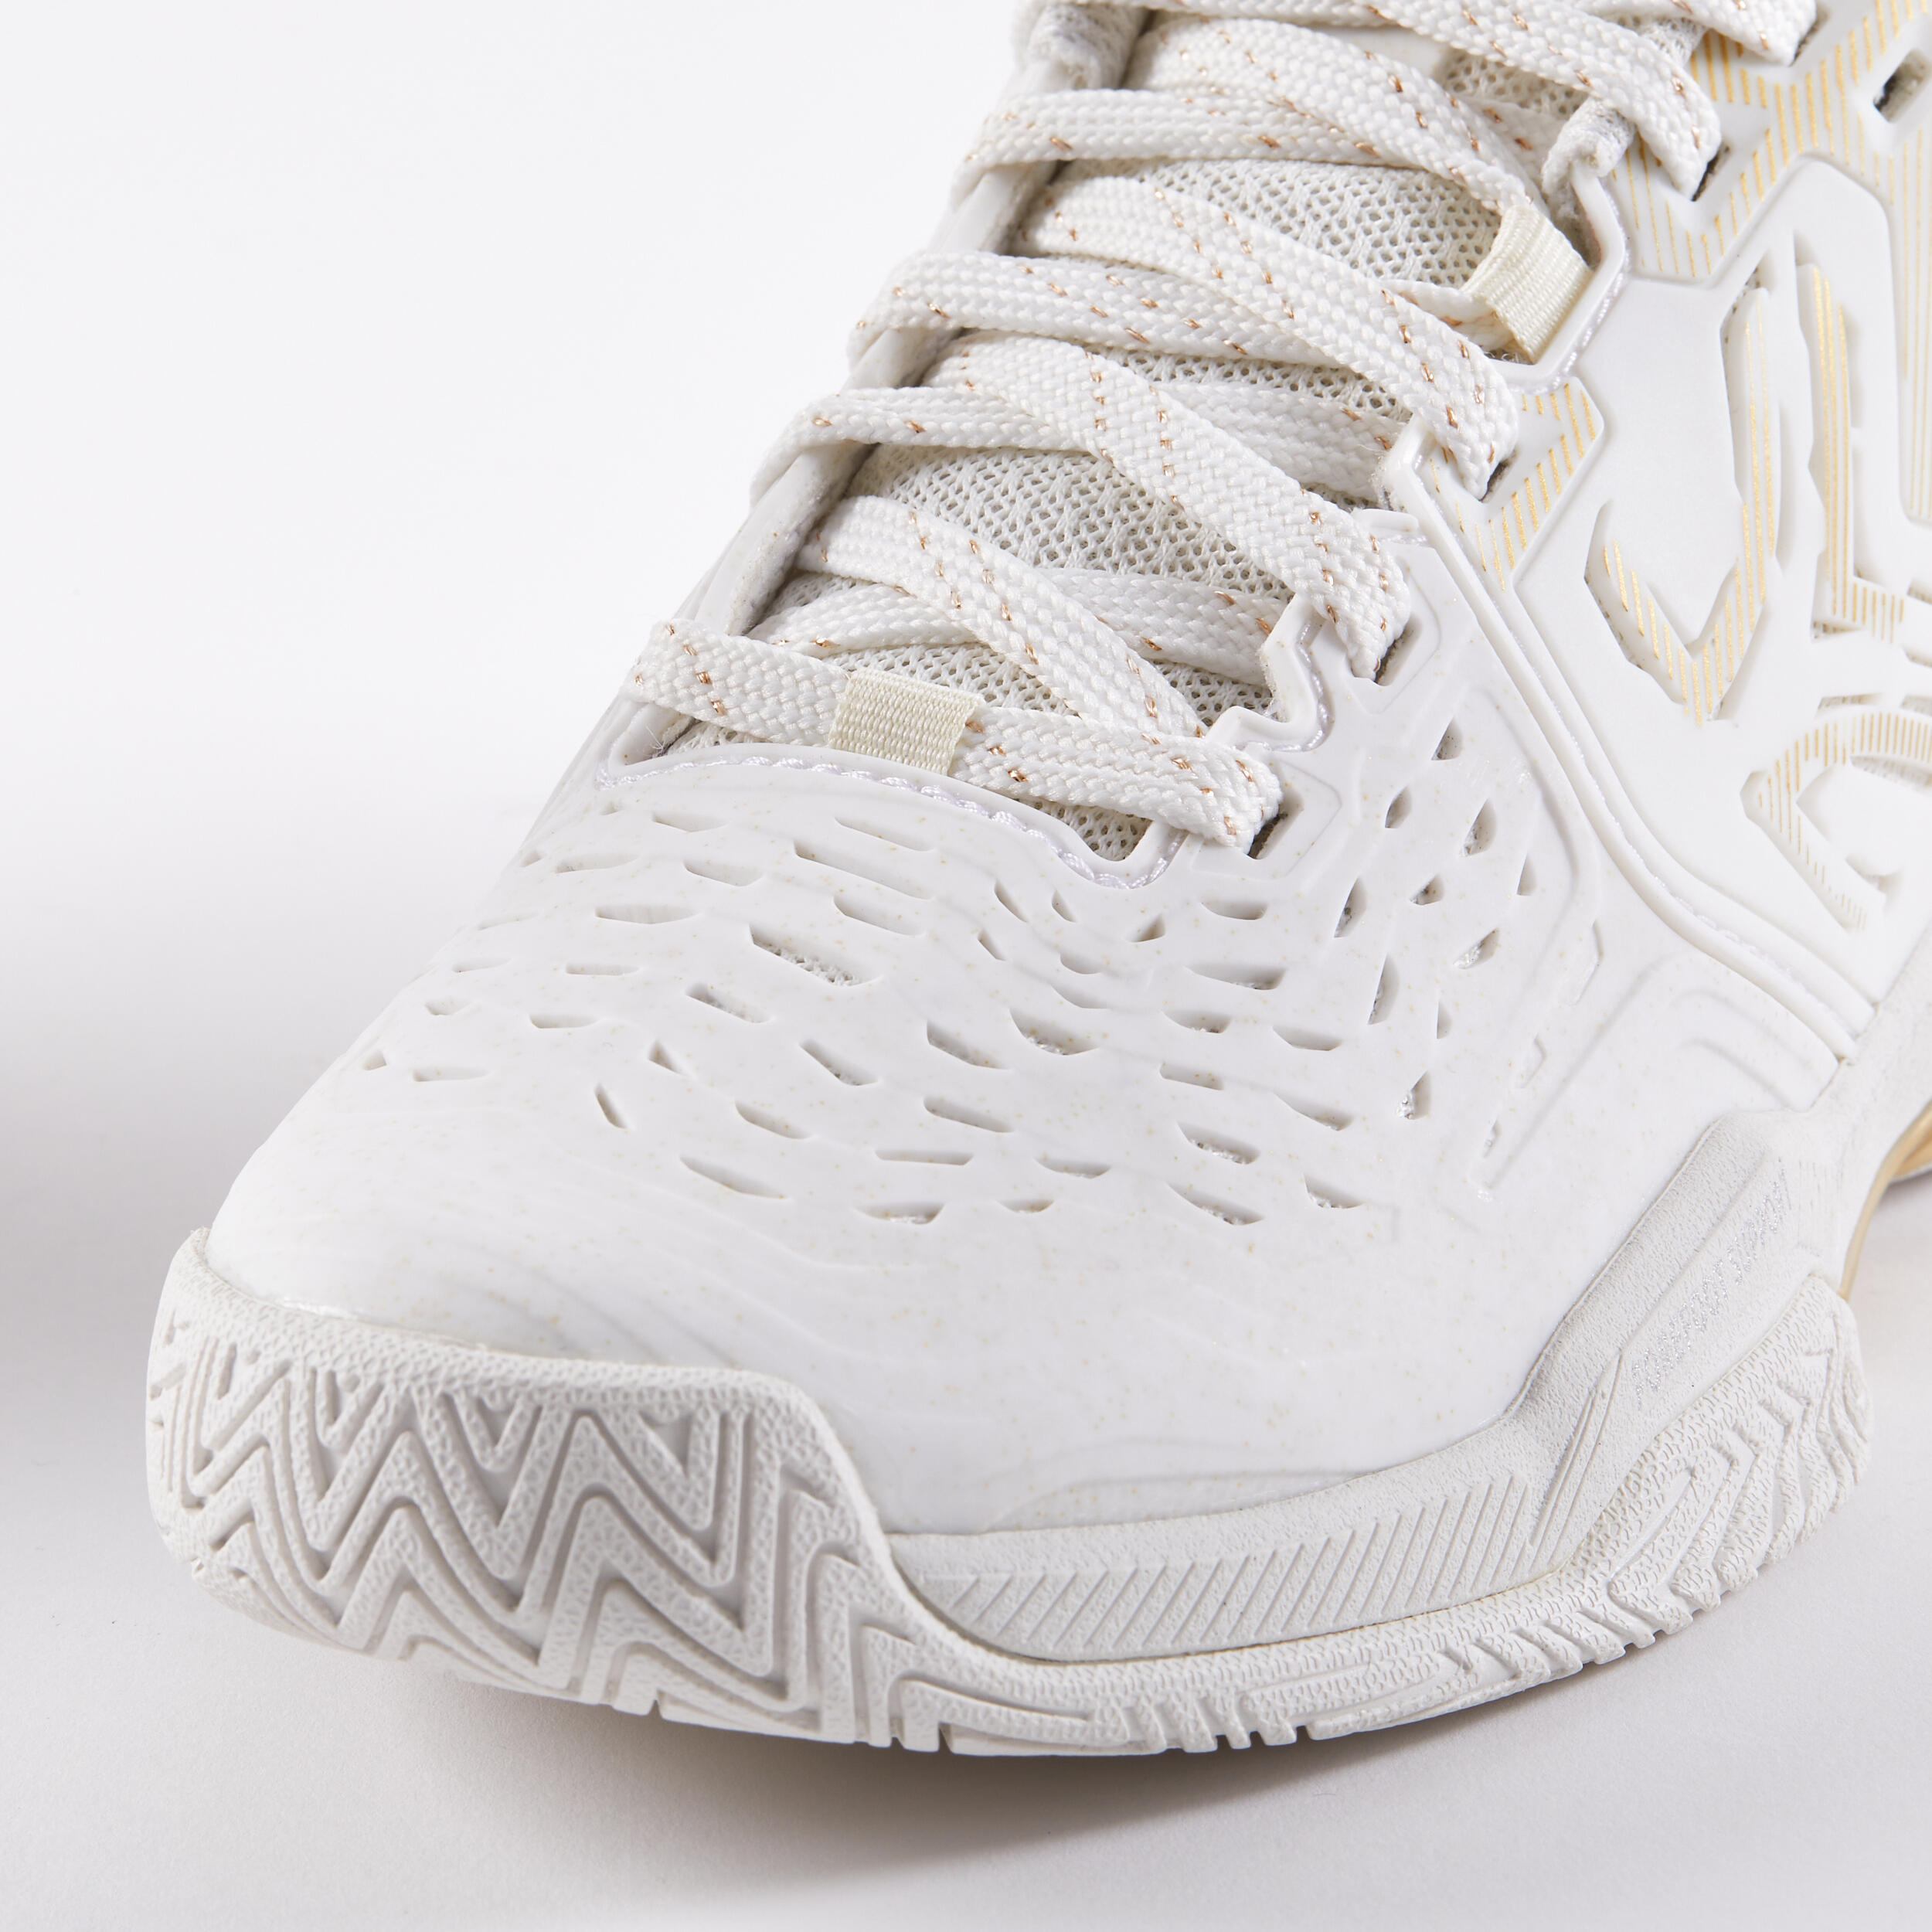 Women's Multi-Court Tennis Shoe Strong - Off-White/Gold 4/7